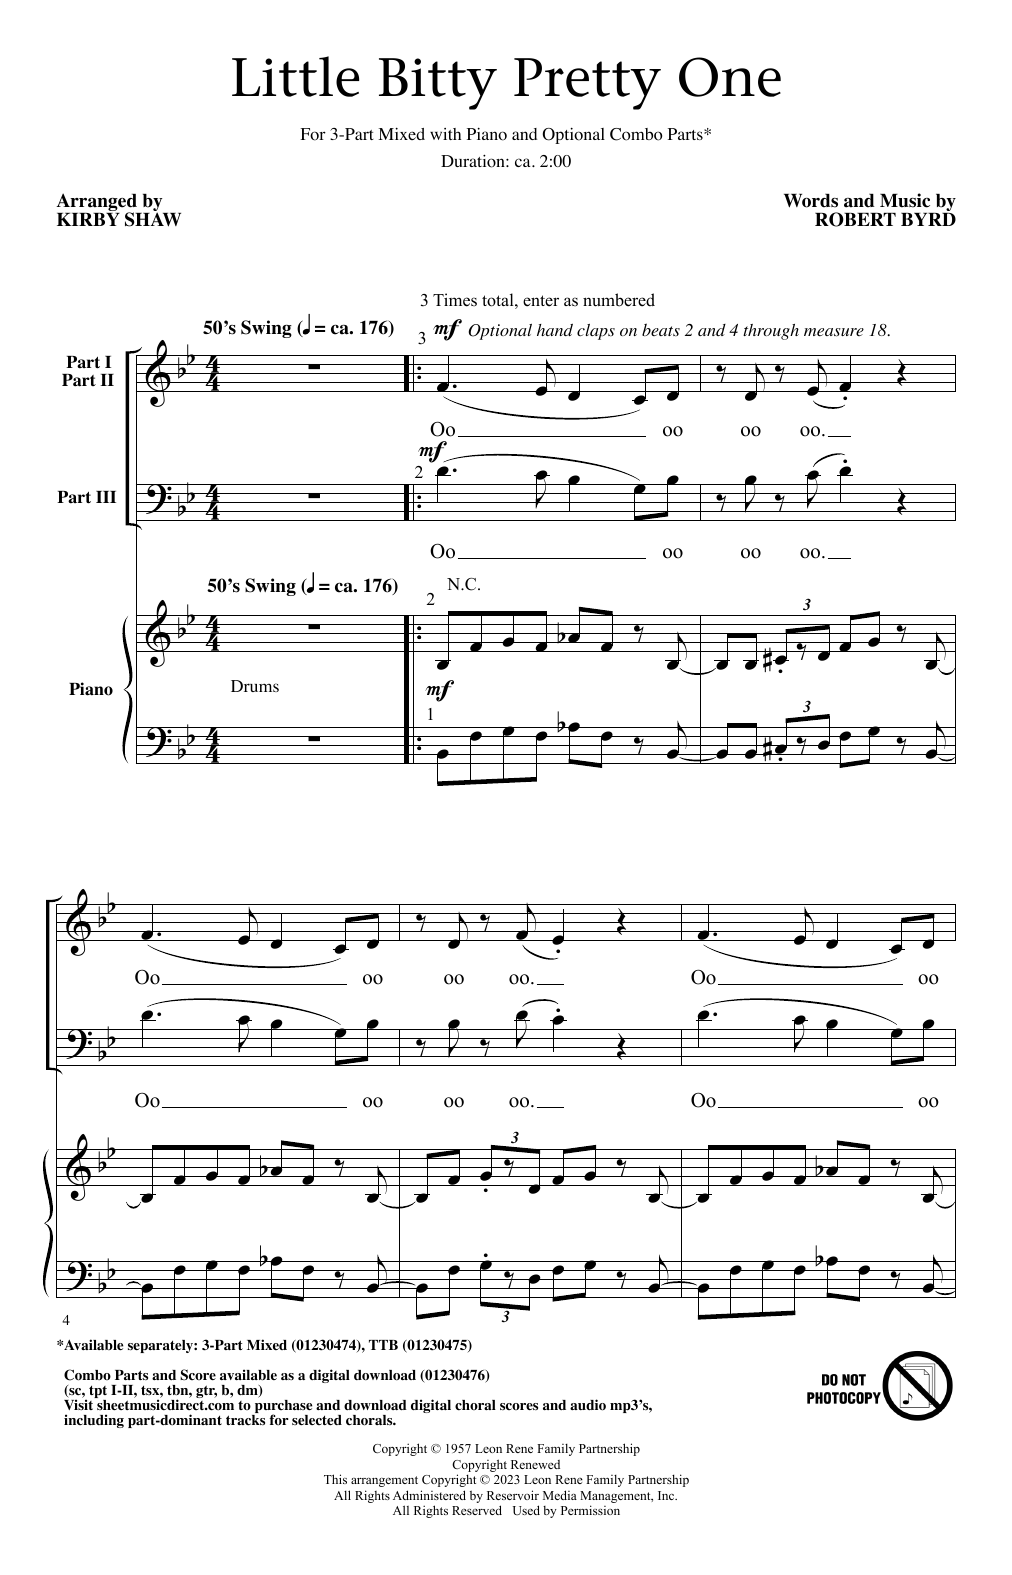 Bobby Day Little Bitty Pretty One (arr. Kirby Shaw) sheet music notes printable PDF score